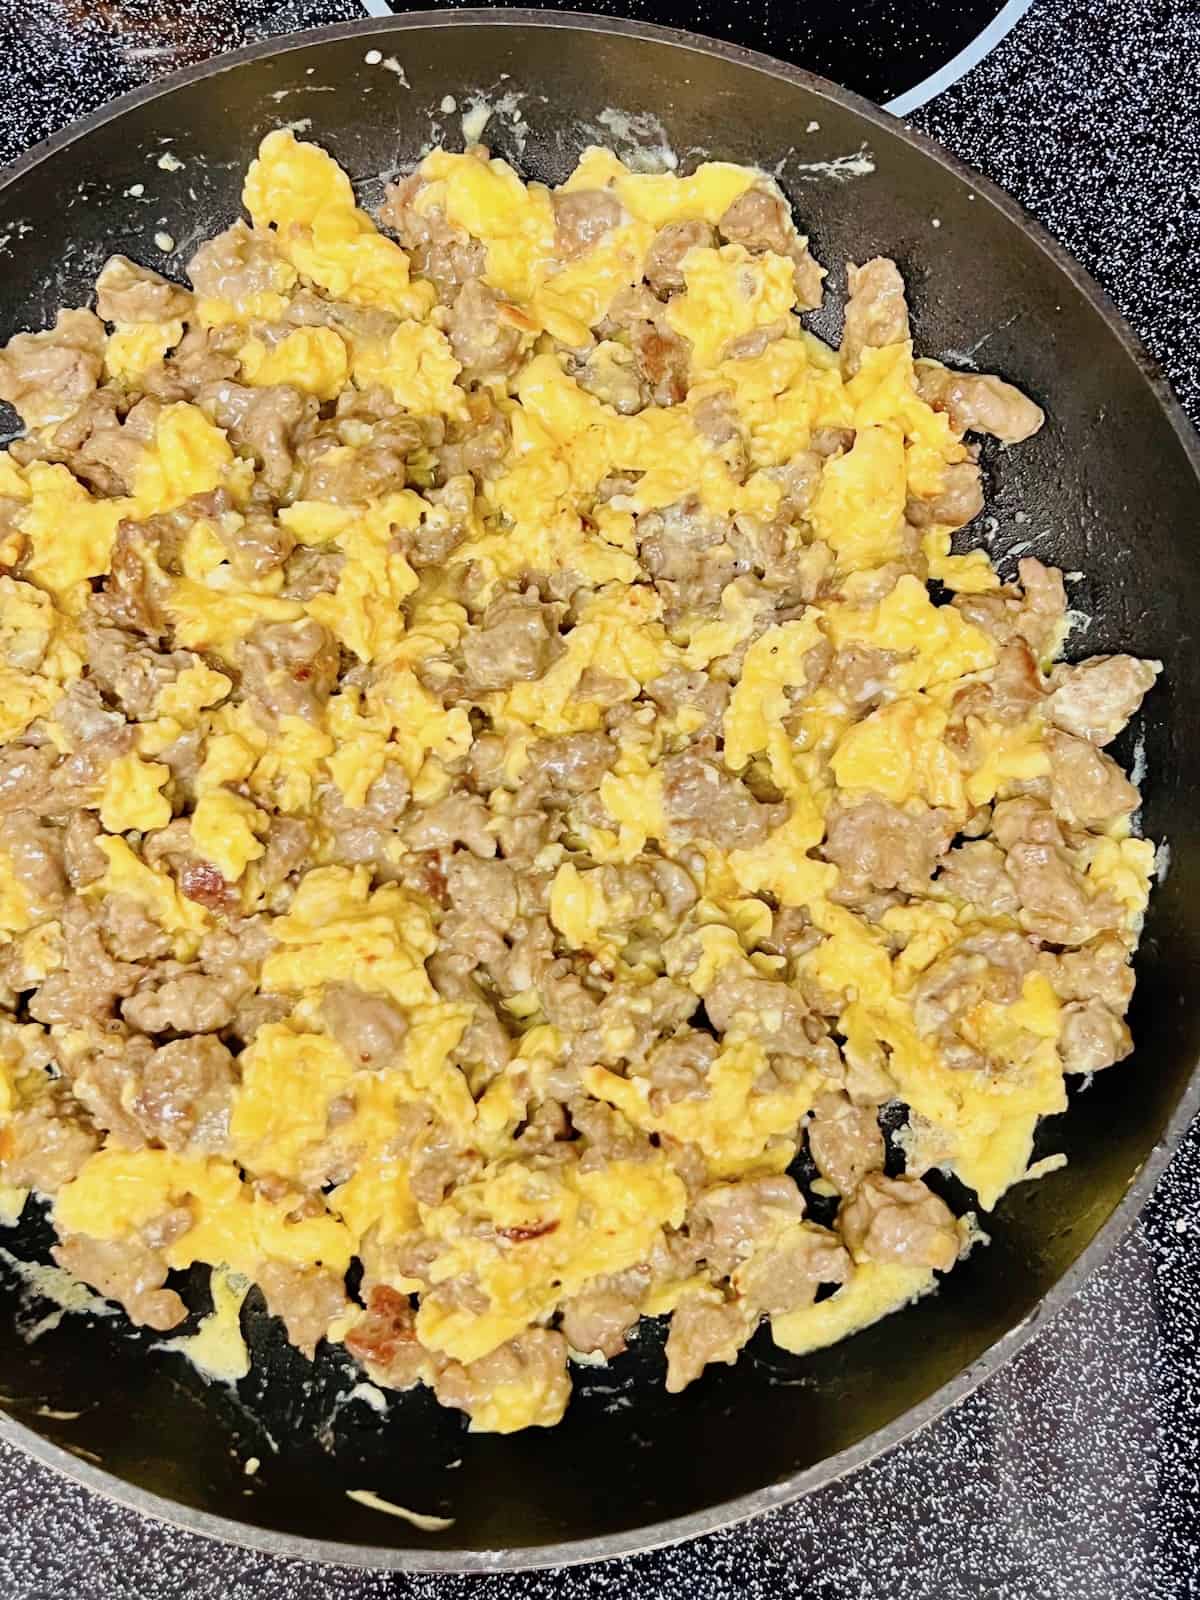 Breakfast Sausage, Egg, & Cheese Scramble Crumbled sausage and eggs cooked in the skillet.